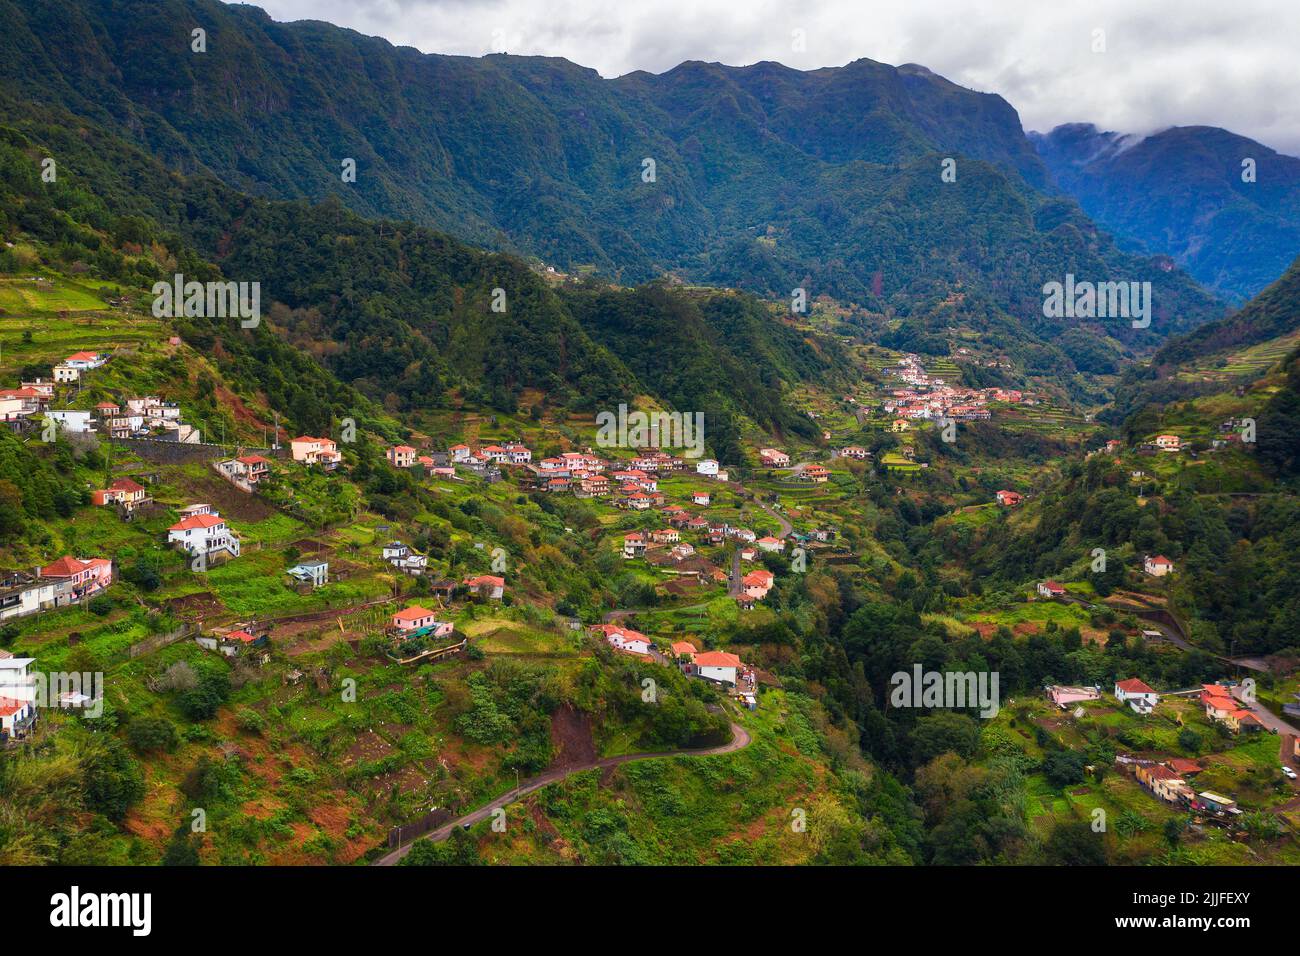 Aerial view of villages in the mountains of Madeira Islands, Portugal Stock Photo